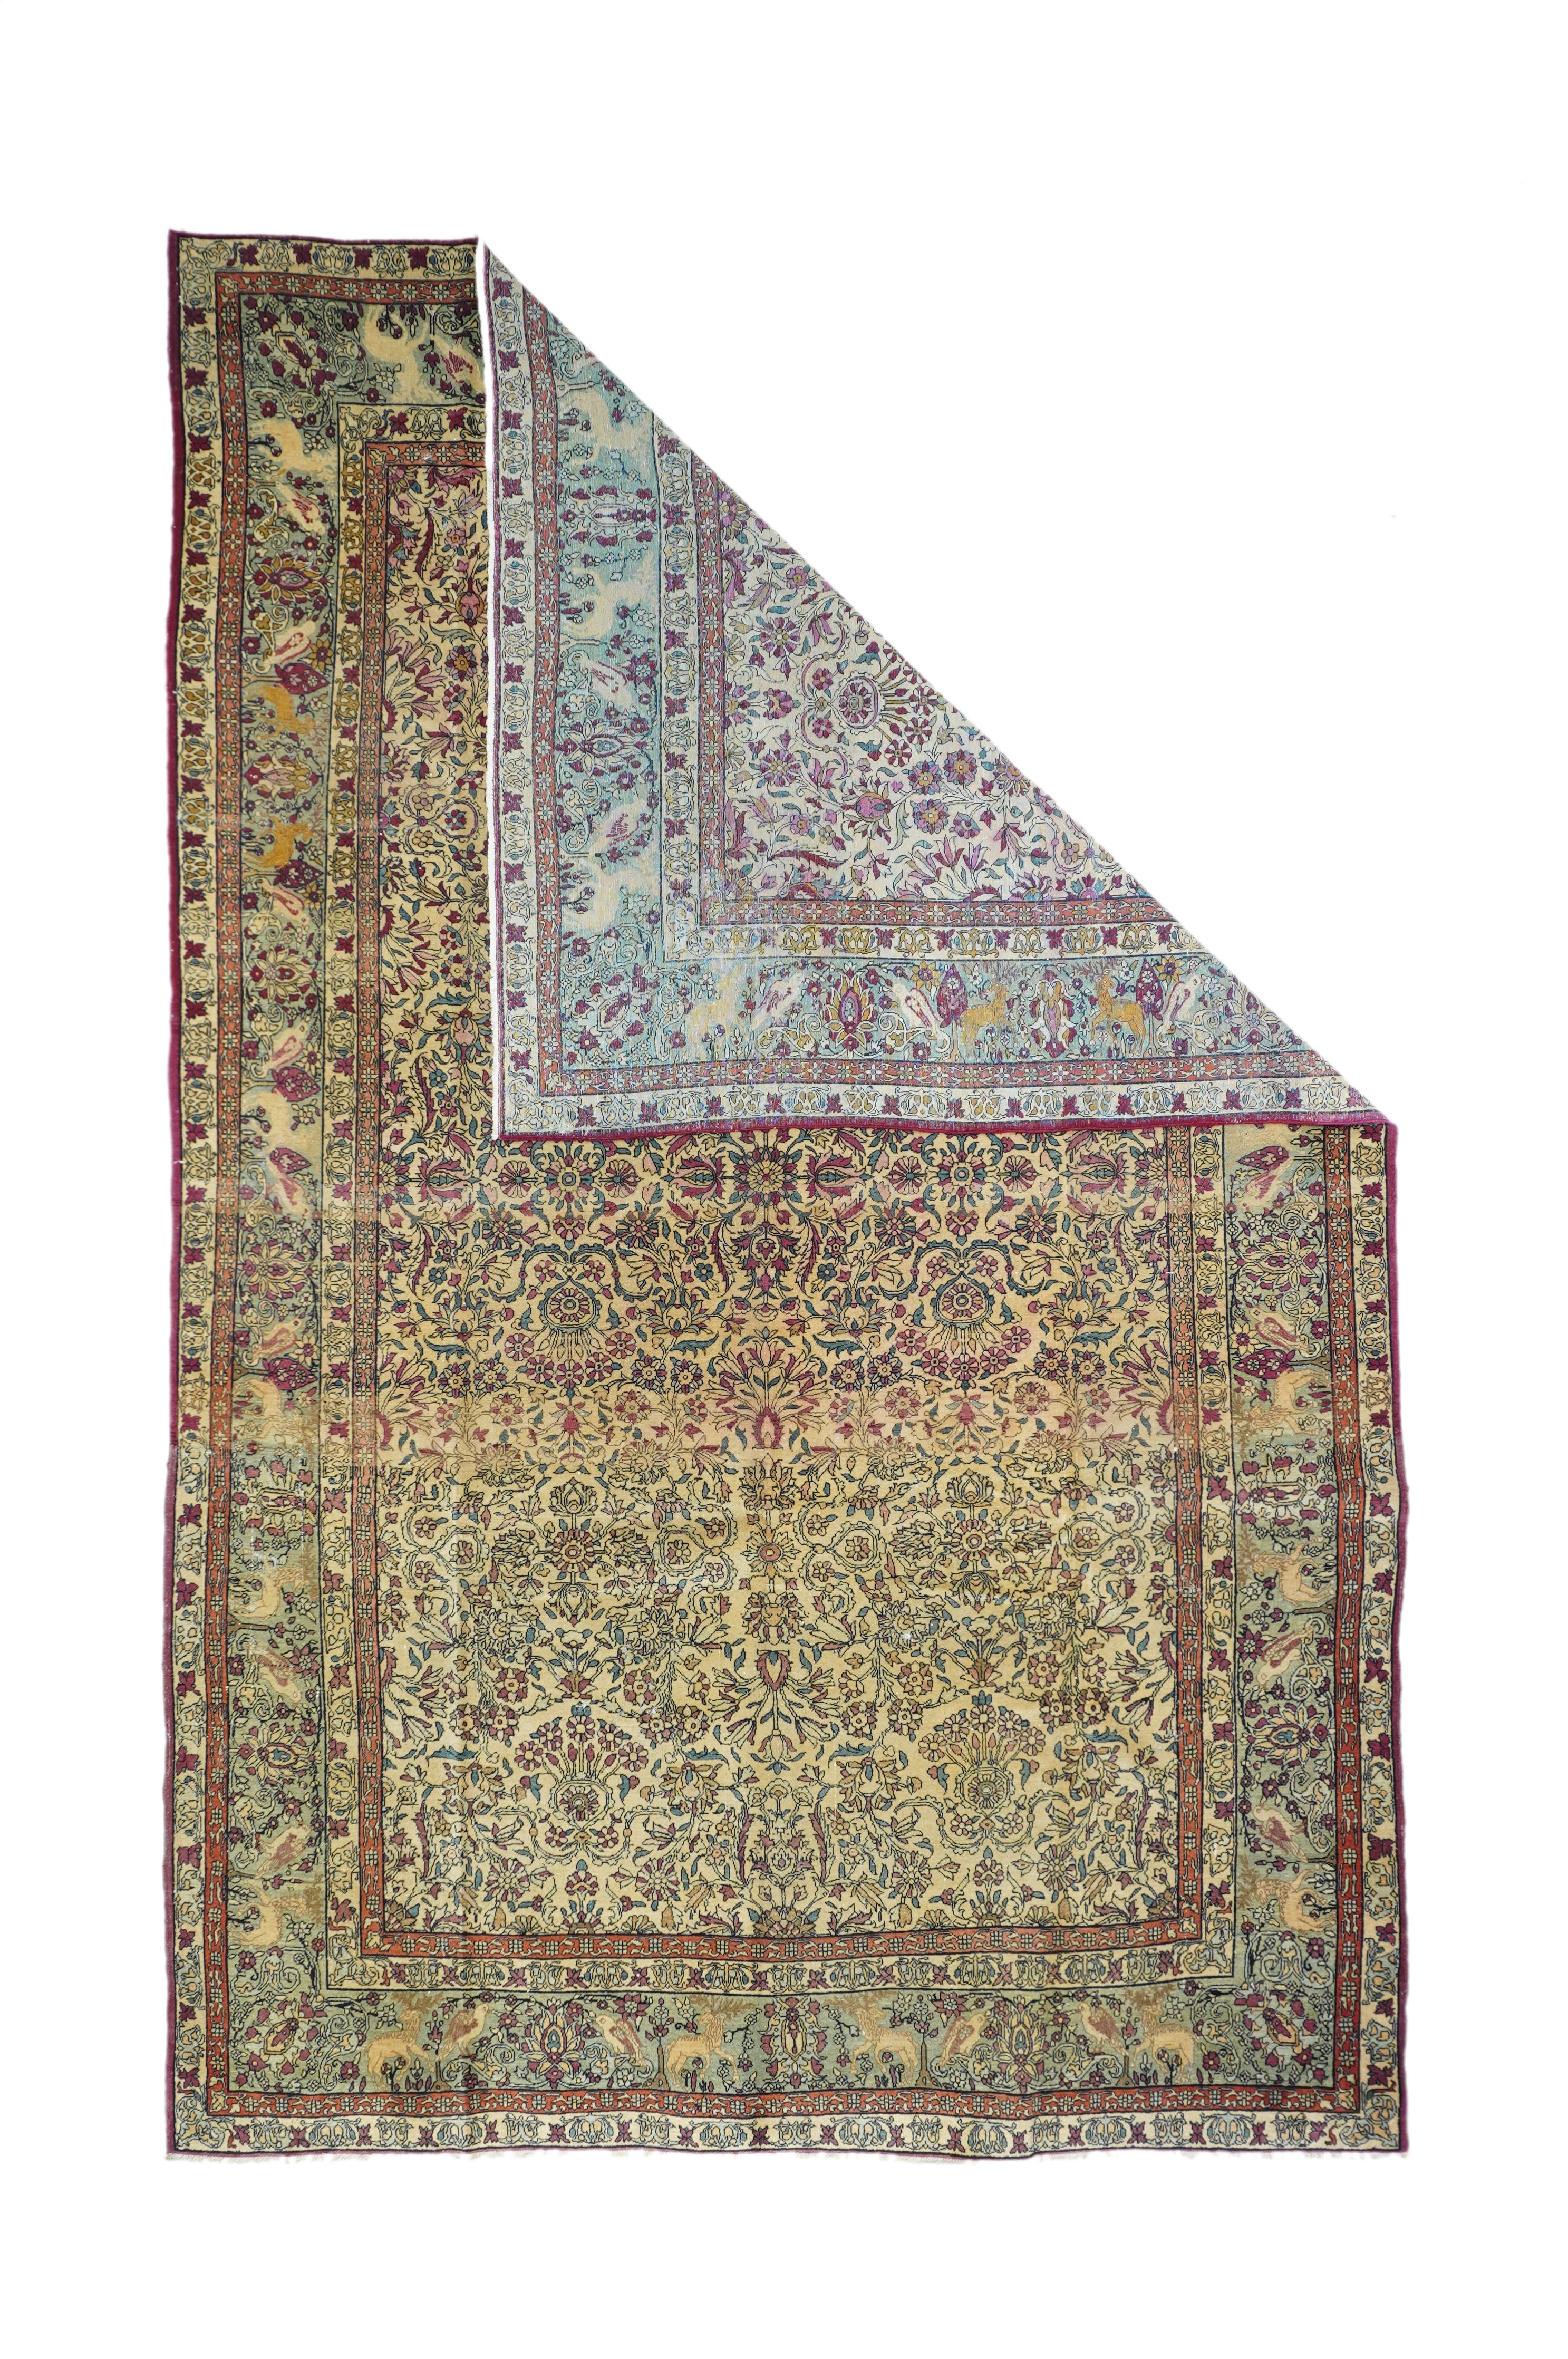 In a popular Persian size, this finely woven, interwar city rug features a sandy-straw field with an allover pattern of cloud bands, palmettes, sprays of triple rosettes, palmette quatrefoils, daisies and tulips. Abrashed light green border with